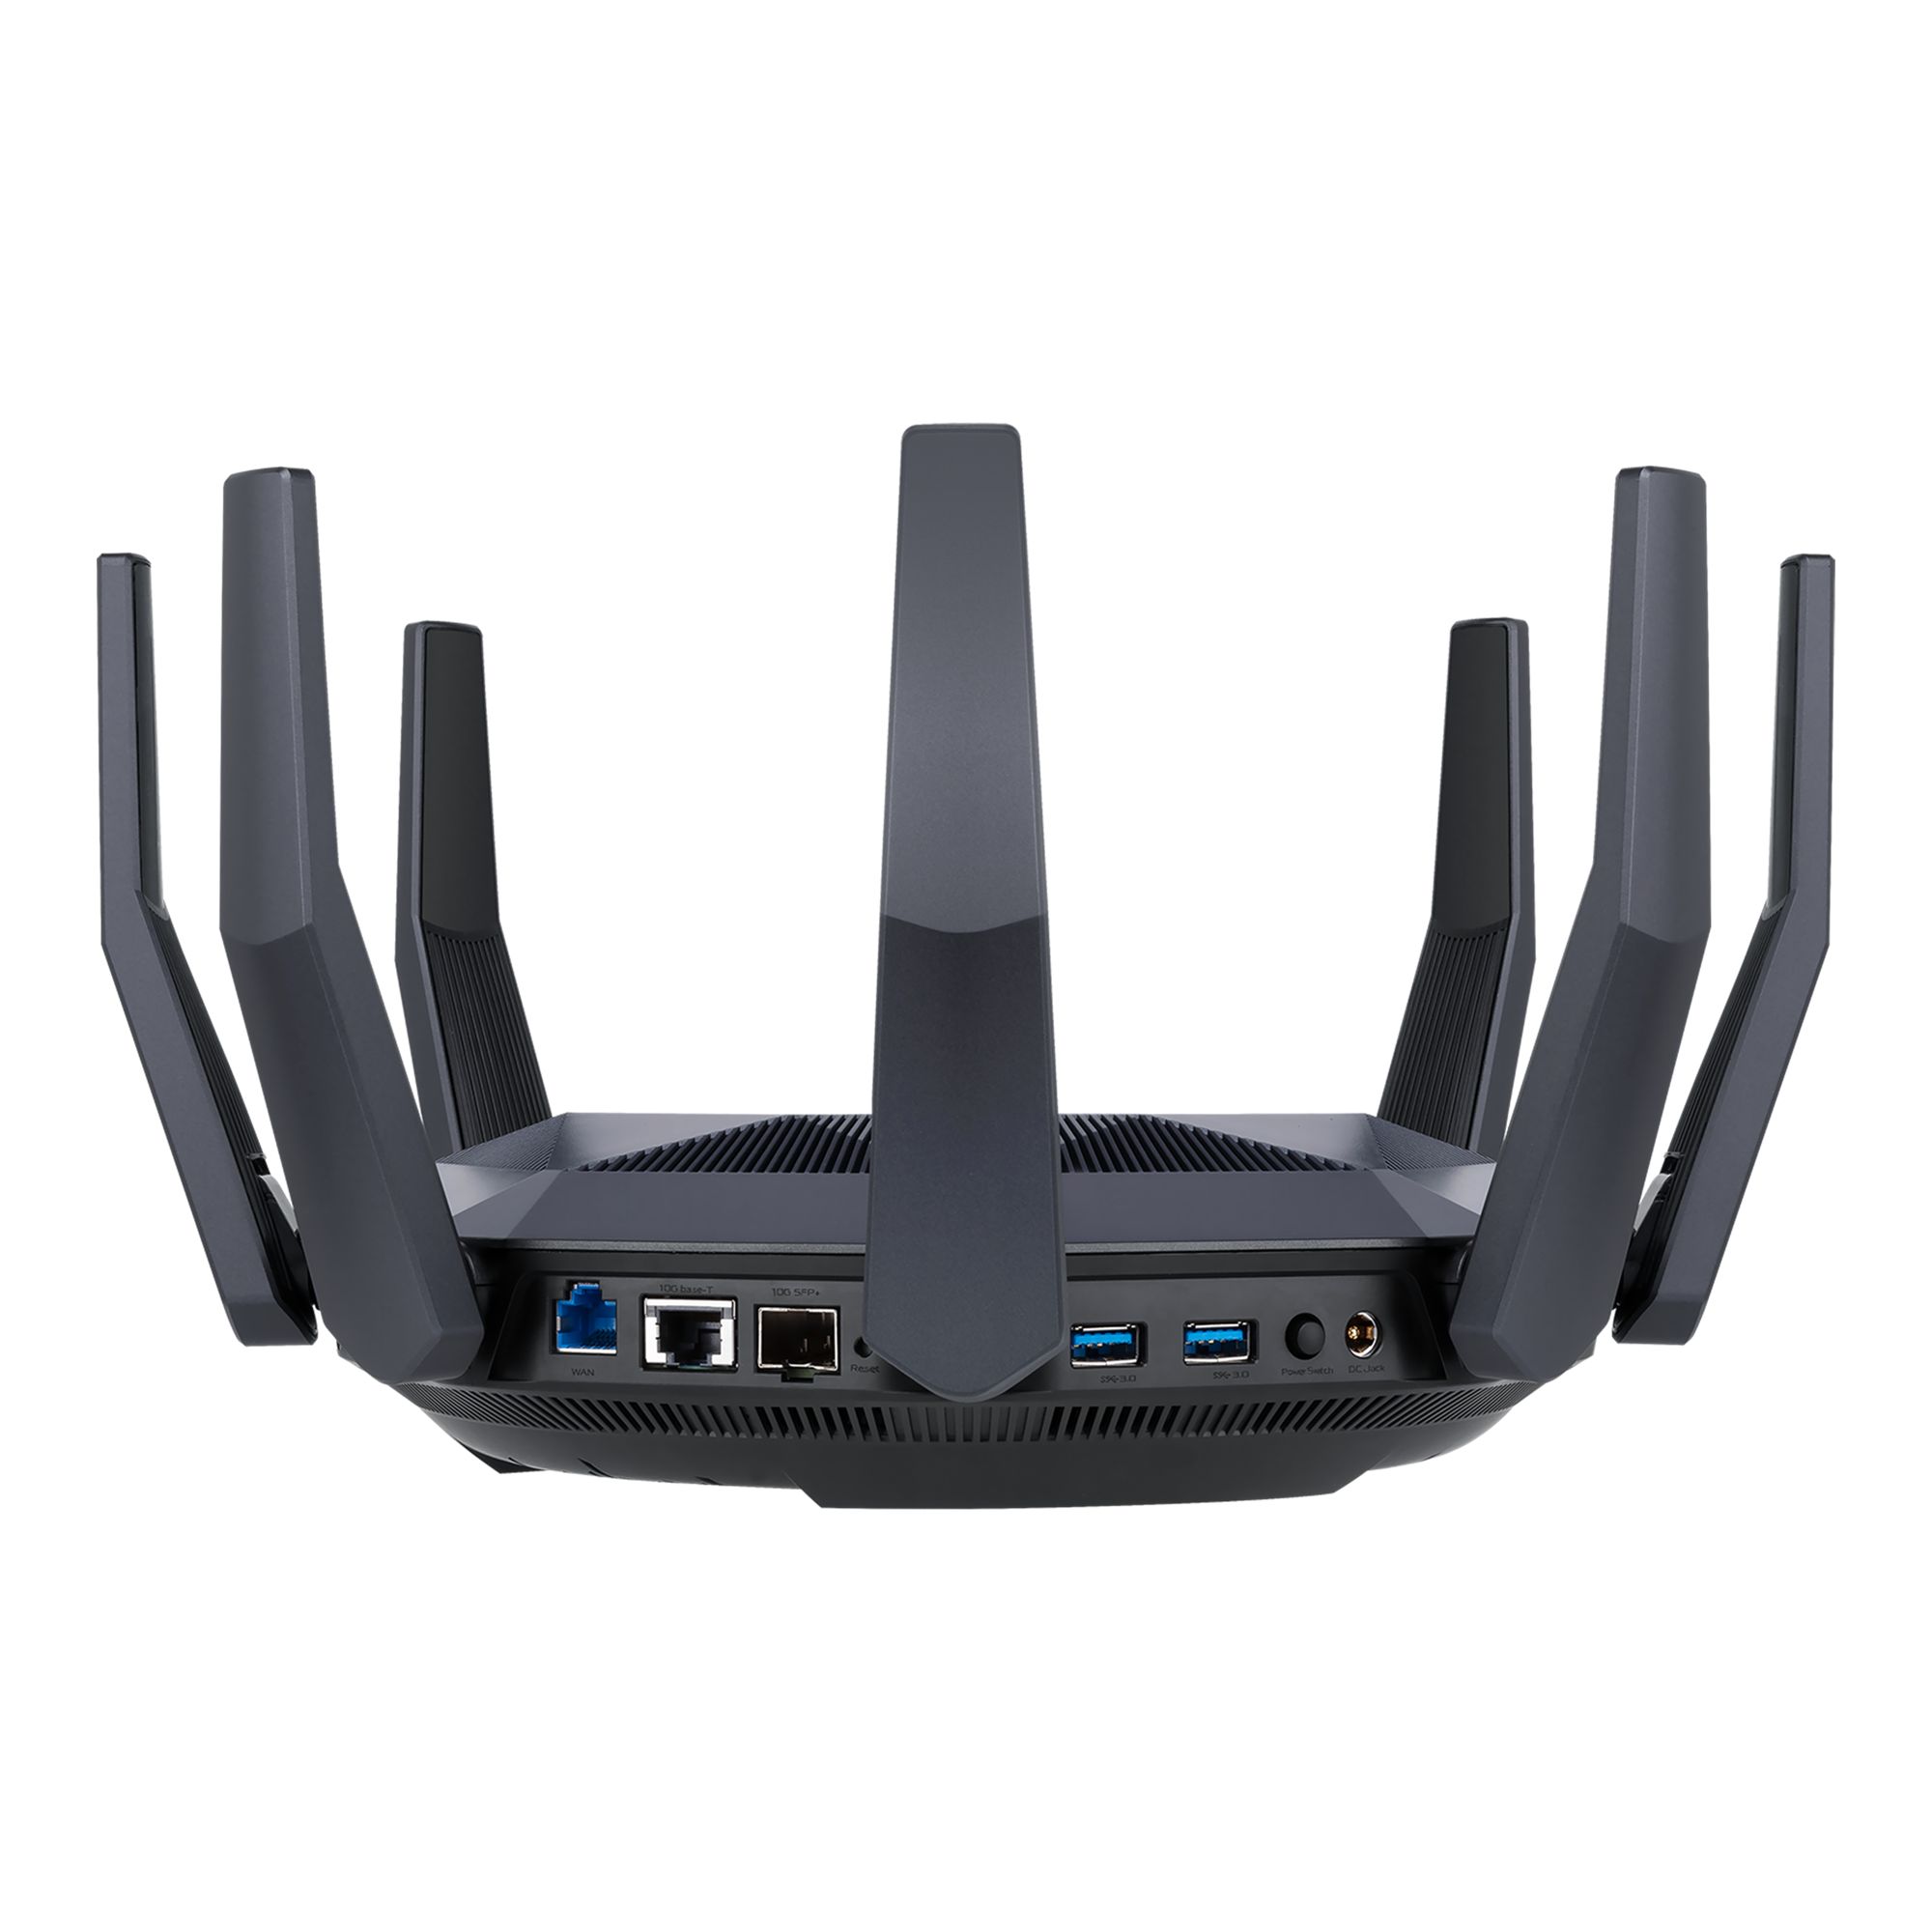 Router Wireless Asus RT-AX89X, 12-stream AX6000 Dual Band WiFi 6, MIMO and OFDMA, Network Standard: IEEE 802.11a, IEEE 802.11b, IEEE 802.11g, WiFi 4 (802.11n), WiFi 5 (802.11ac), WiFi 6 (802.11ax), IPv4, IPv6, External antenna x 8, Transmit/Receive: 2.4 GHz 4 x 4, 5 GHz 8 x 8, 2.2GHz quad-core_3